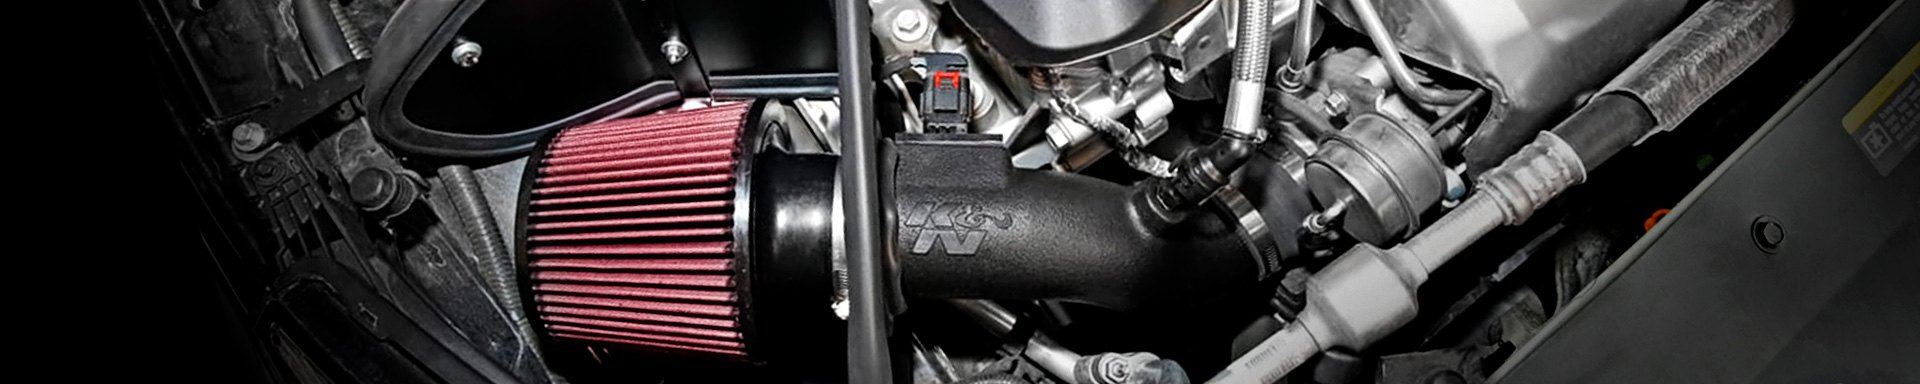 First Look New LineUp Of Performance Air Intakes By K&N For 2013-2017 Chevy Malibu